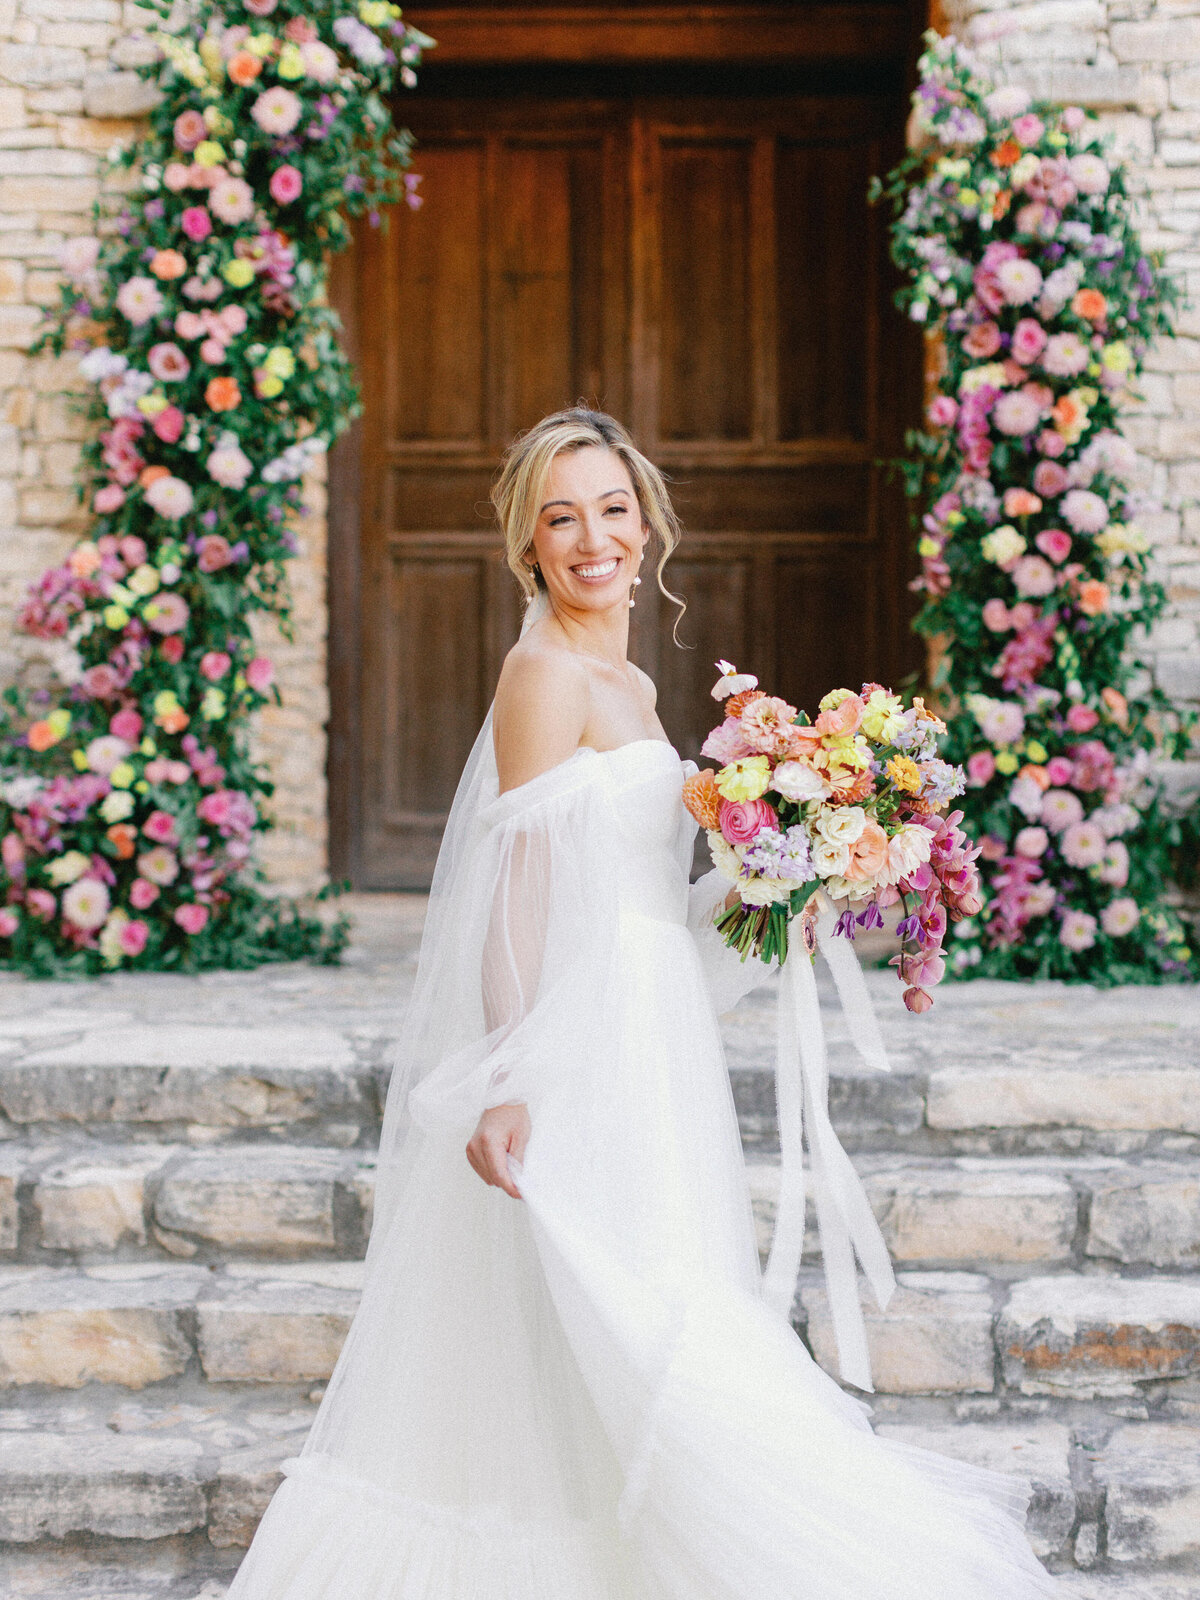 Anastasia Strate Photography Camp Lucy Dallas wedding photographer-49